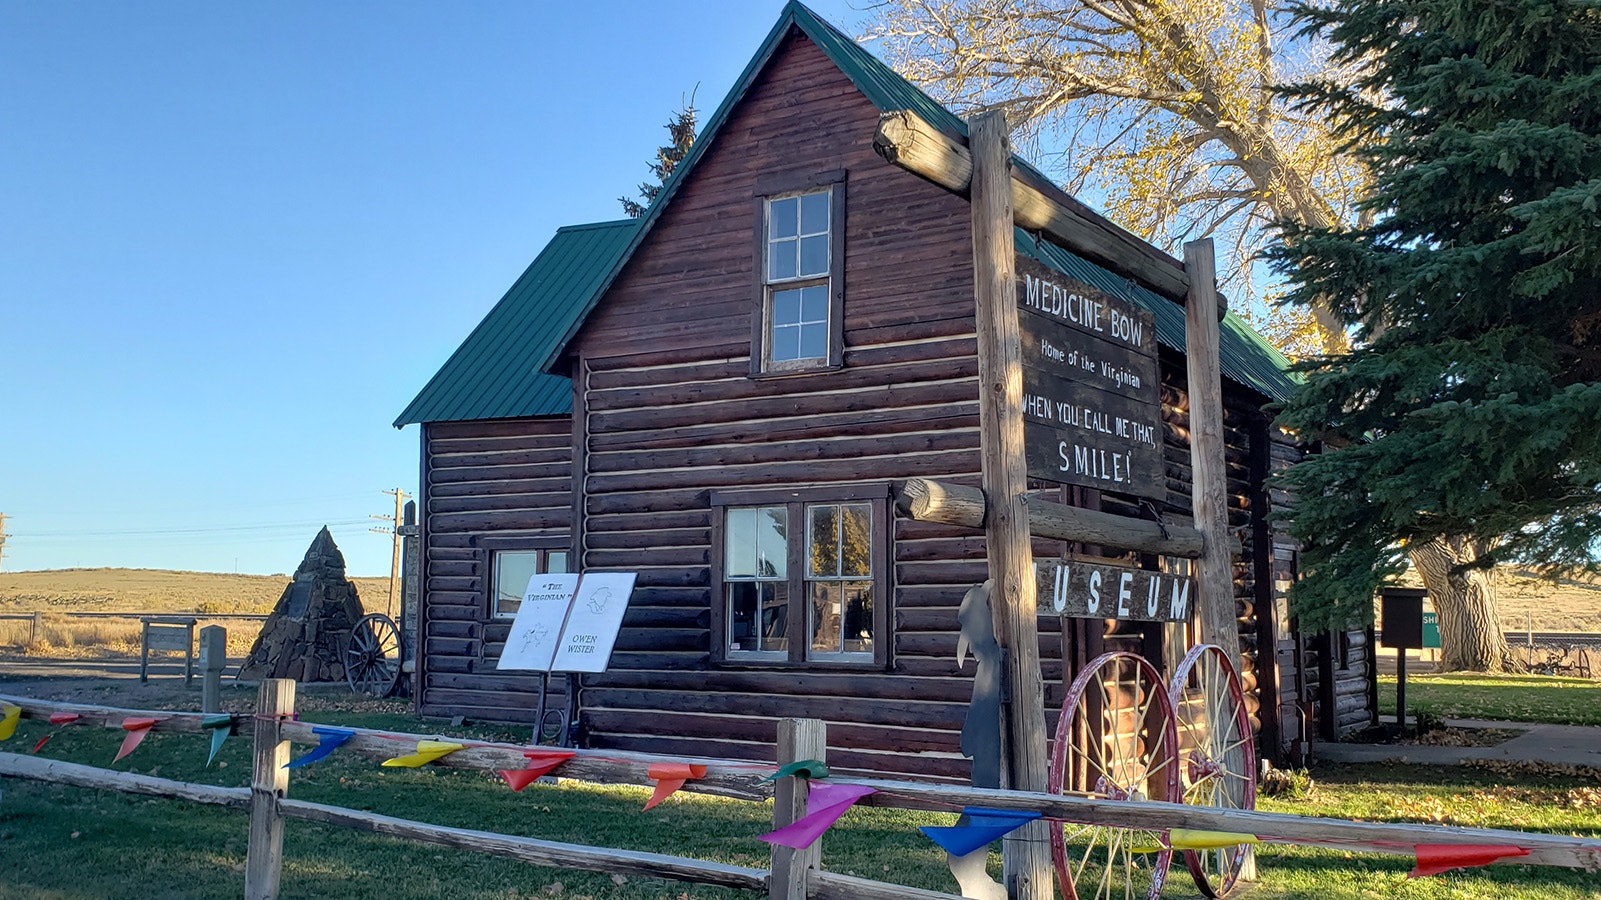 Owen Wister's cabin was moved and is preserved on the grounds of the Medicine Bow Museum.